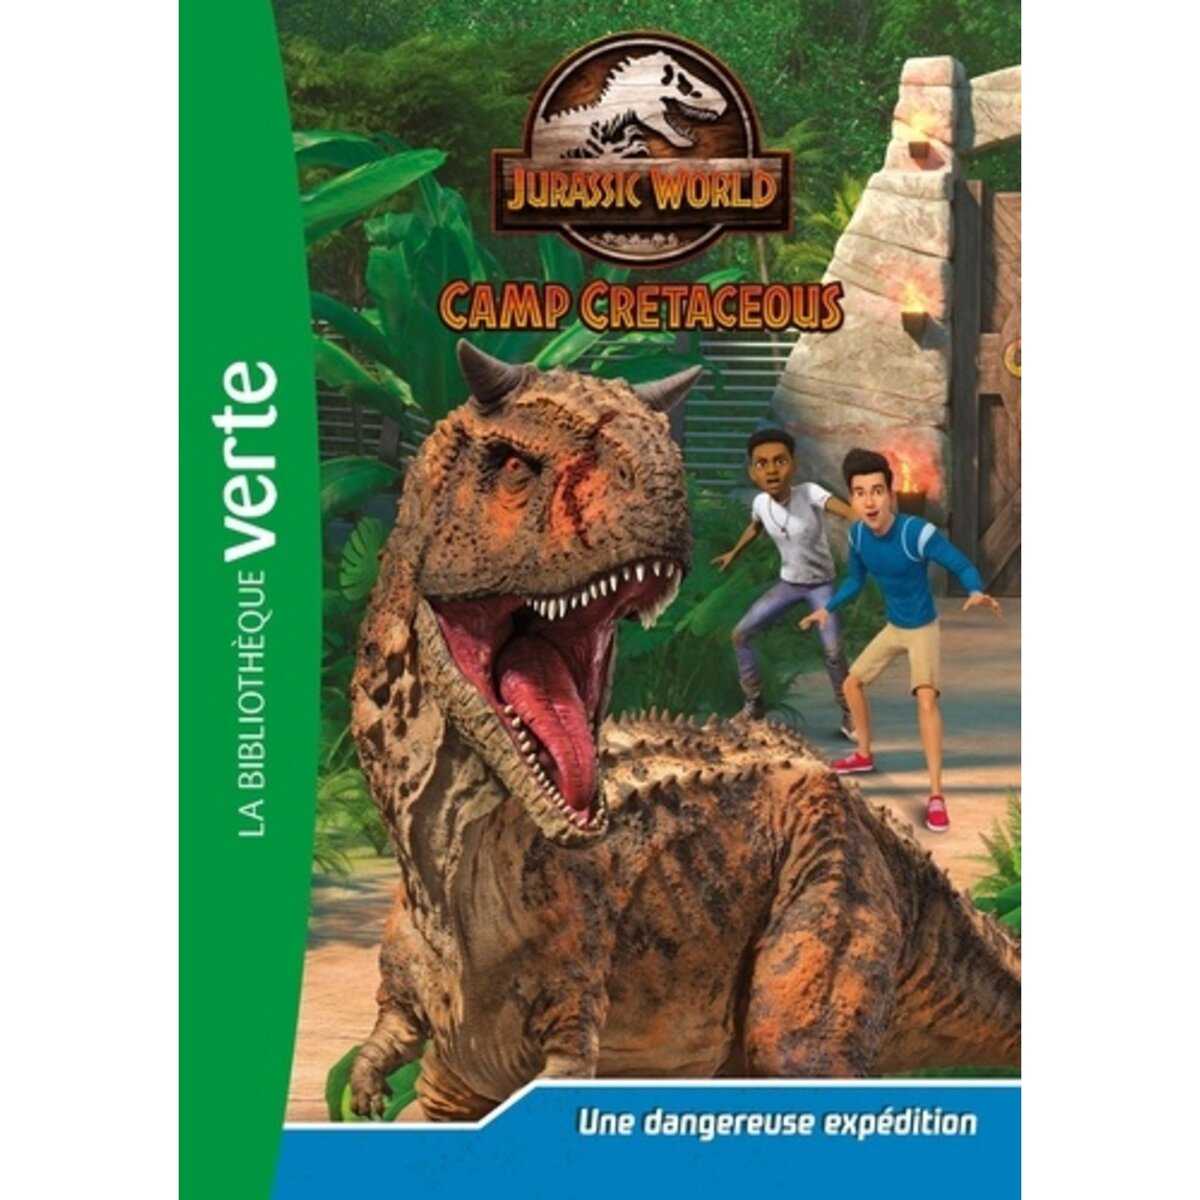  JURASSIC WORLD CAMP CRETACEOUS TOME 2 : UNE DANGEREUSE EXPEDITION, Gay Olivier